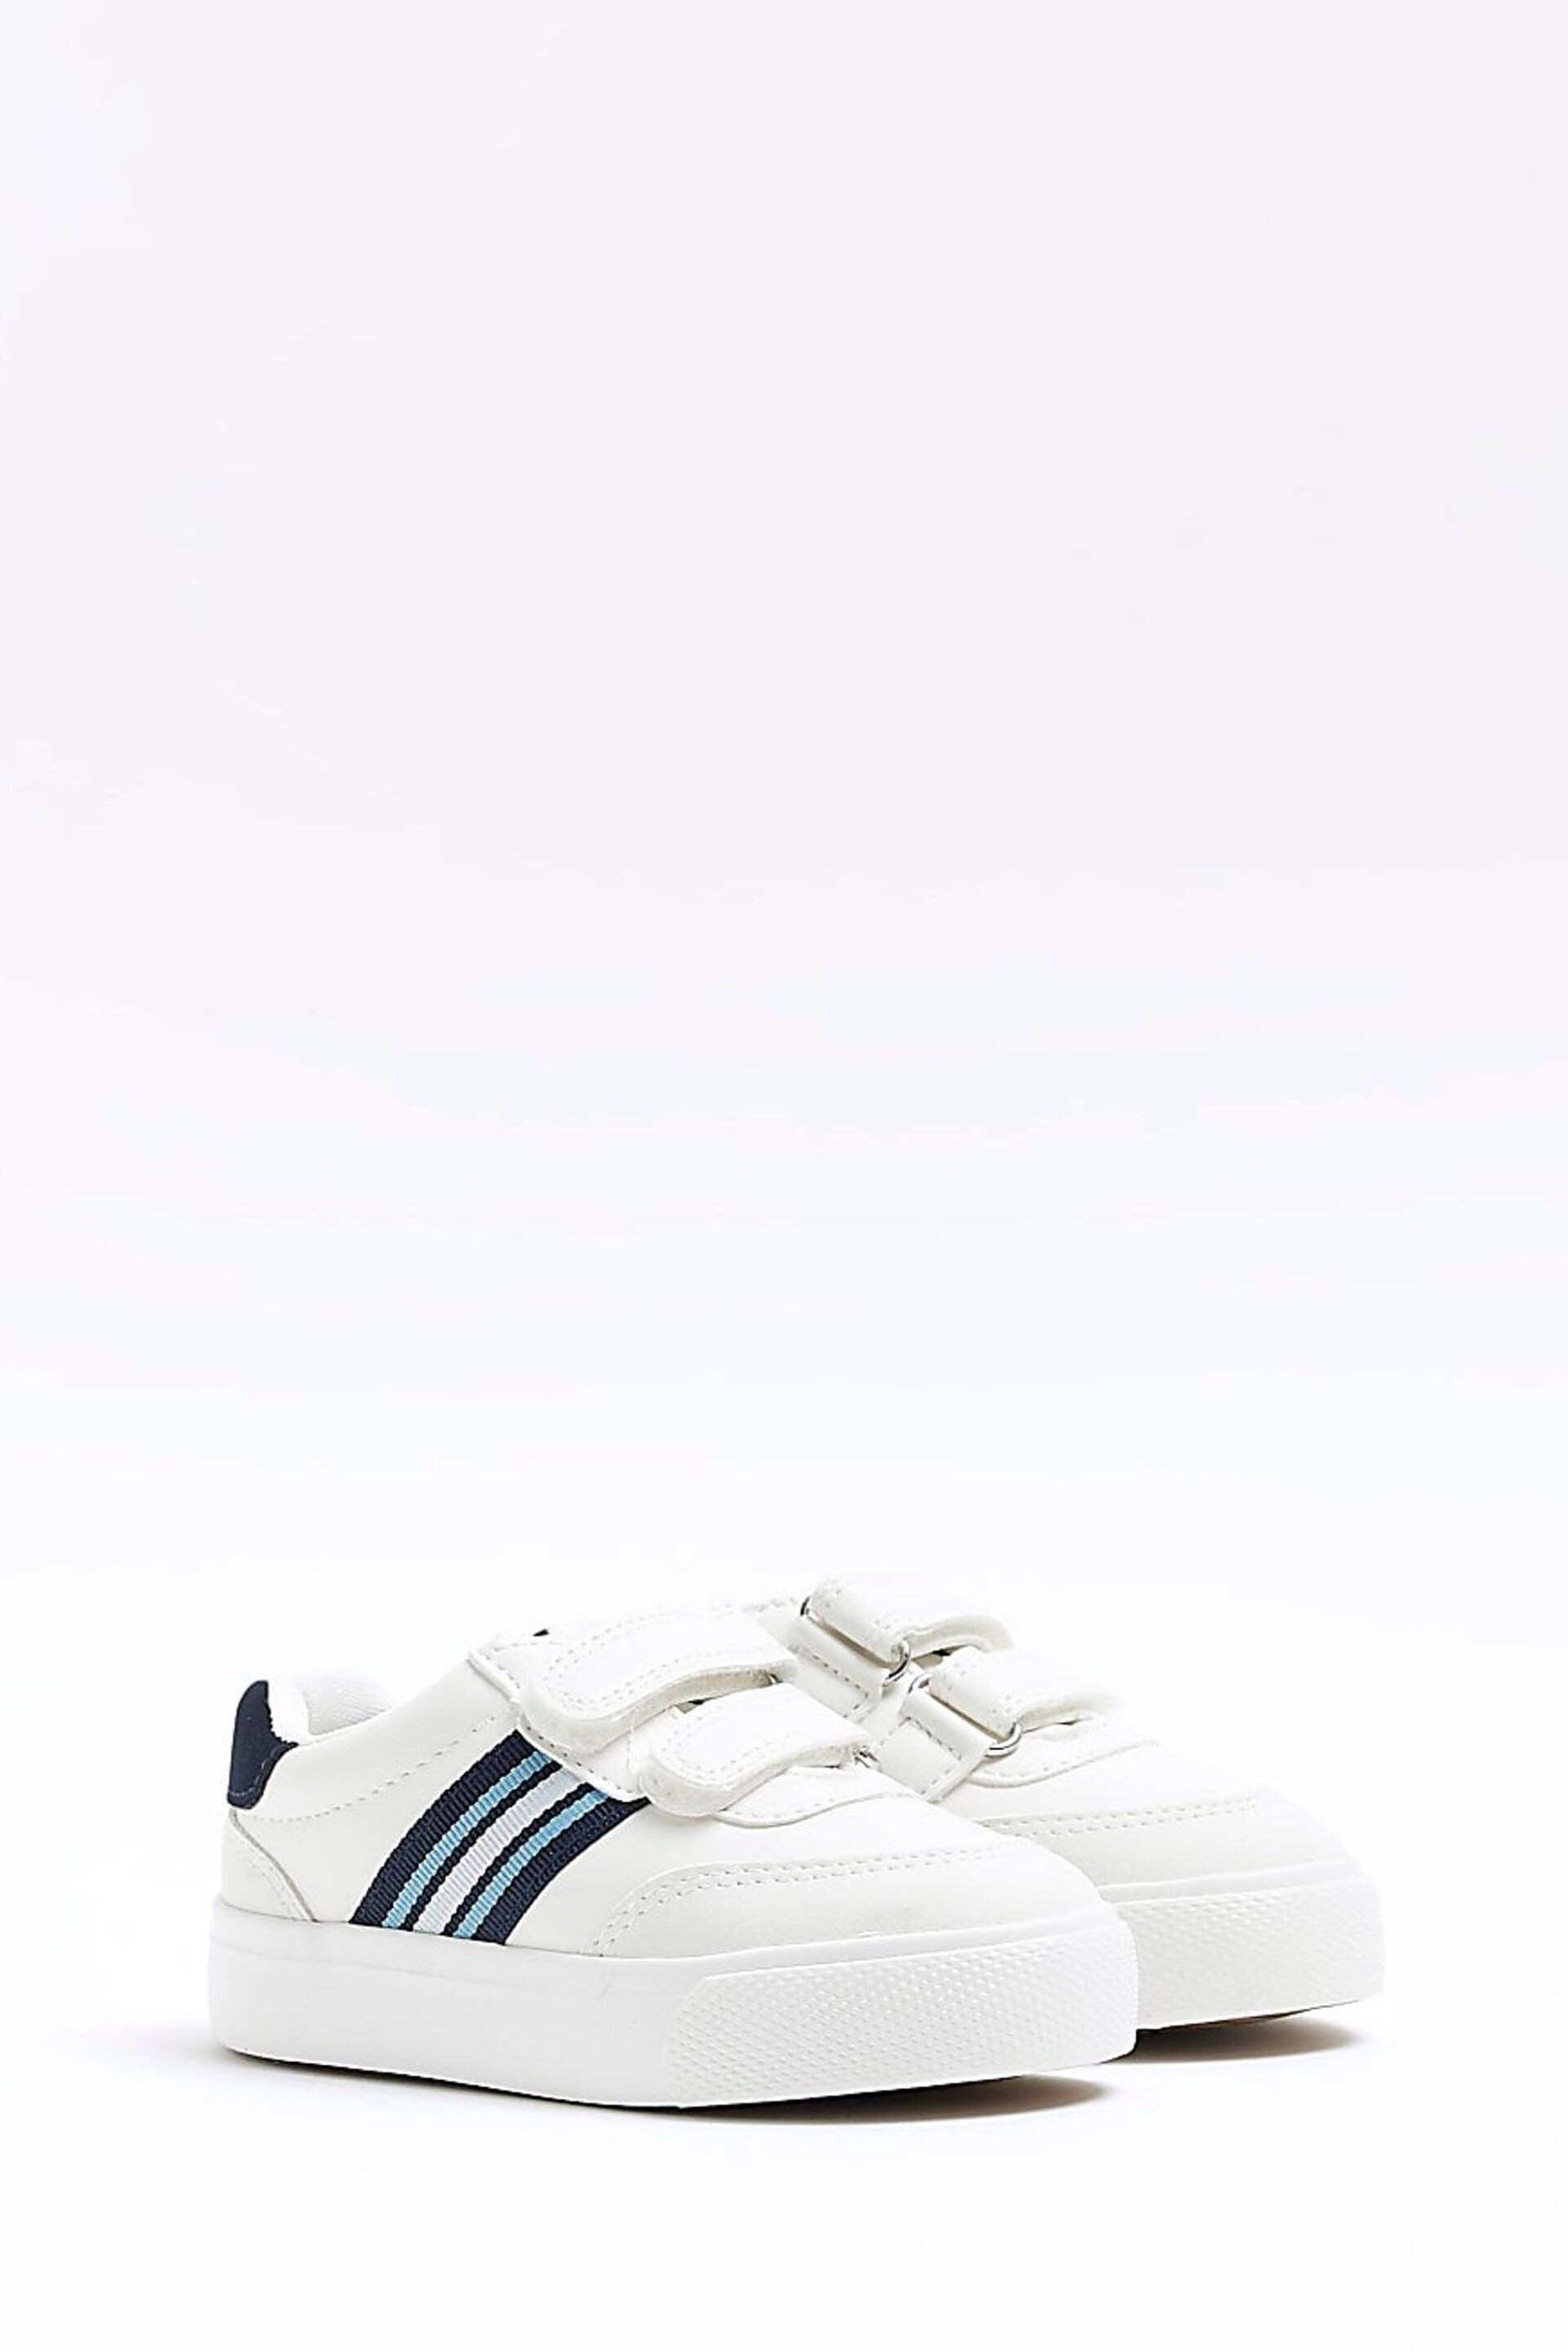 River Island White Boys Striped Plimsole Trainers - Image 2 of 5